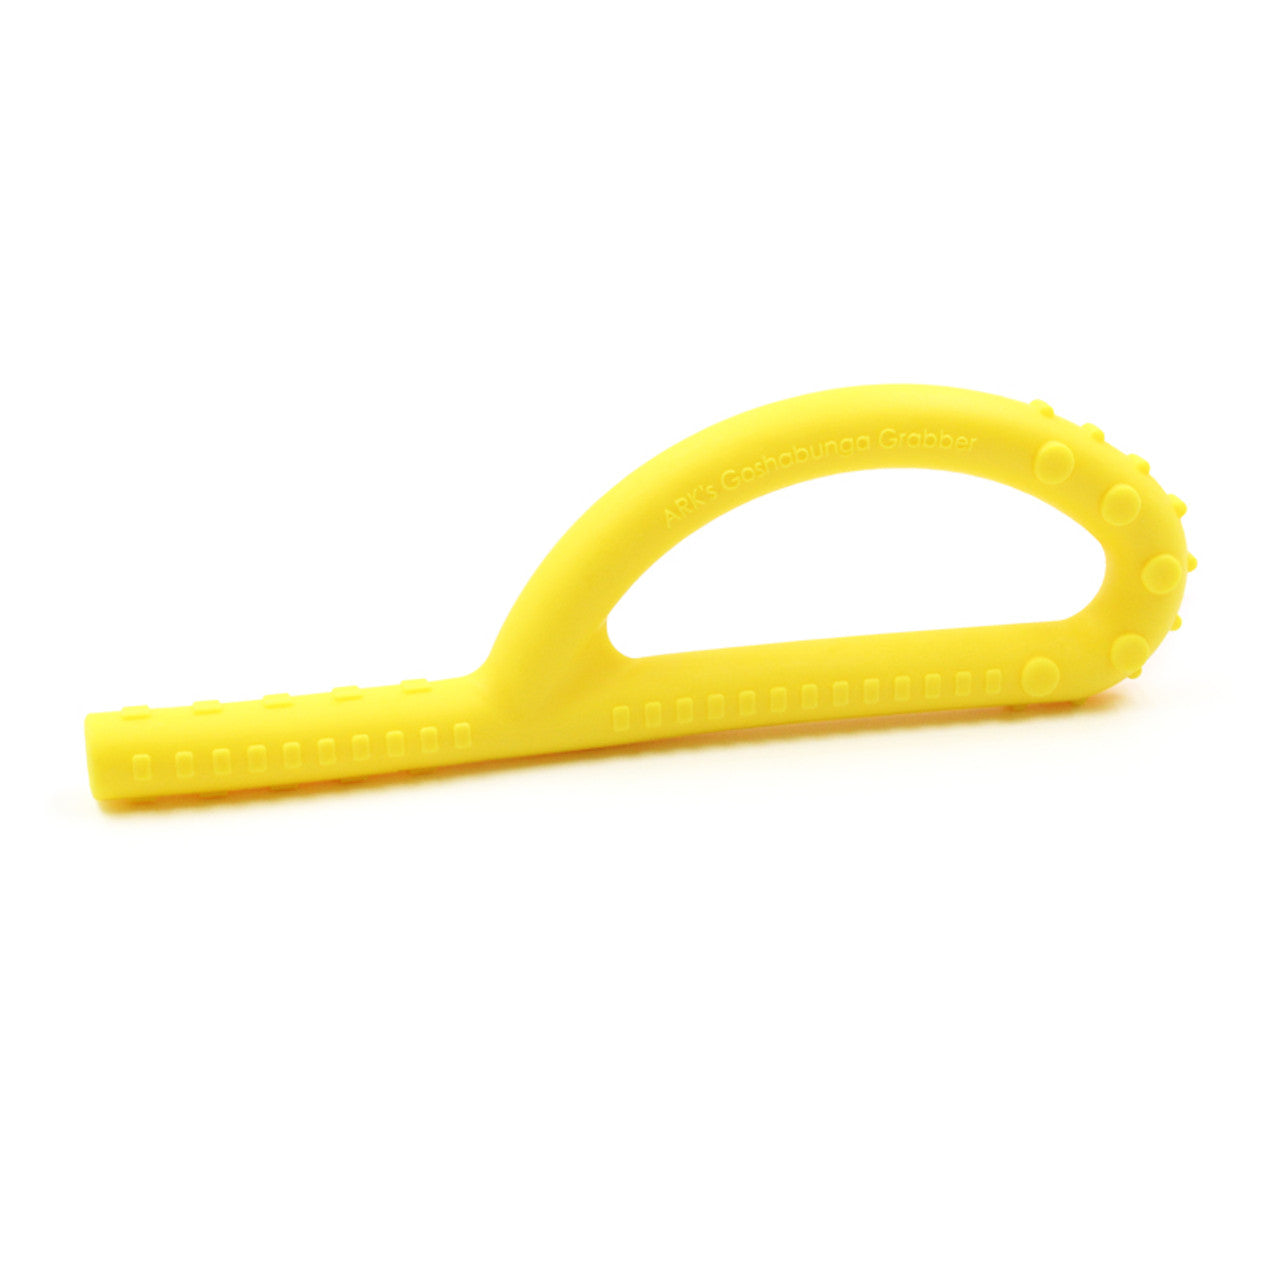 Large Hollow Chewable Handheld Textured Grabber